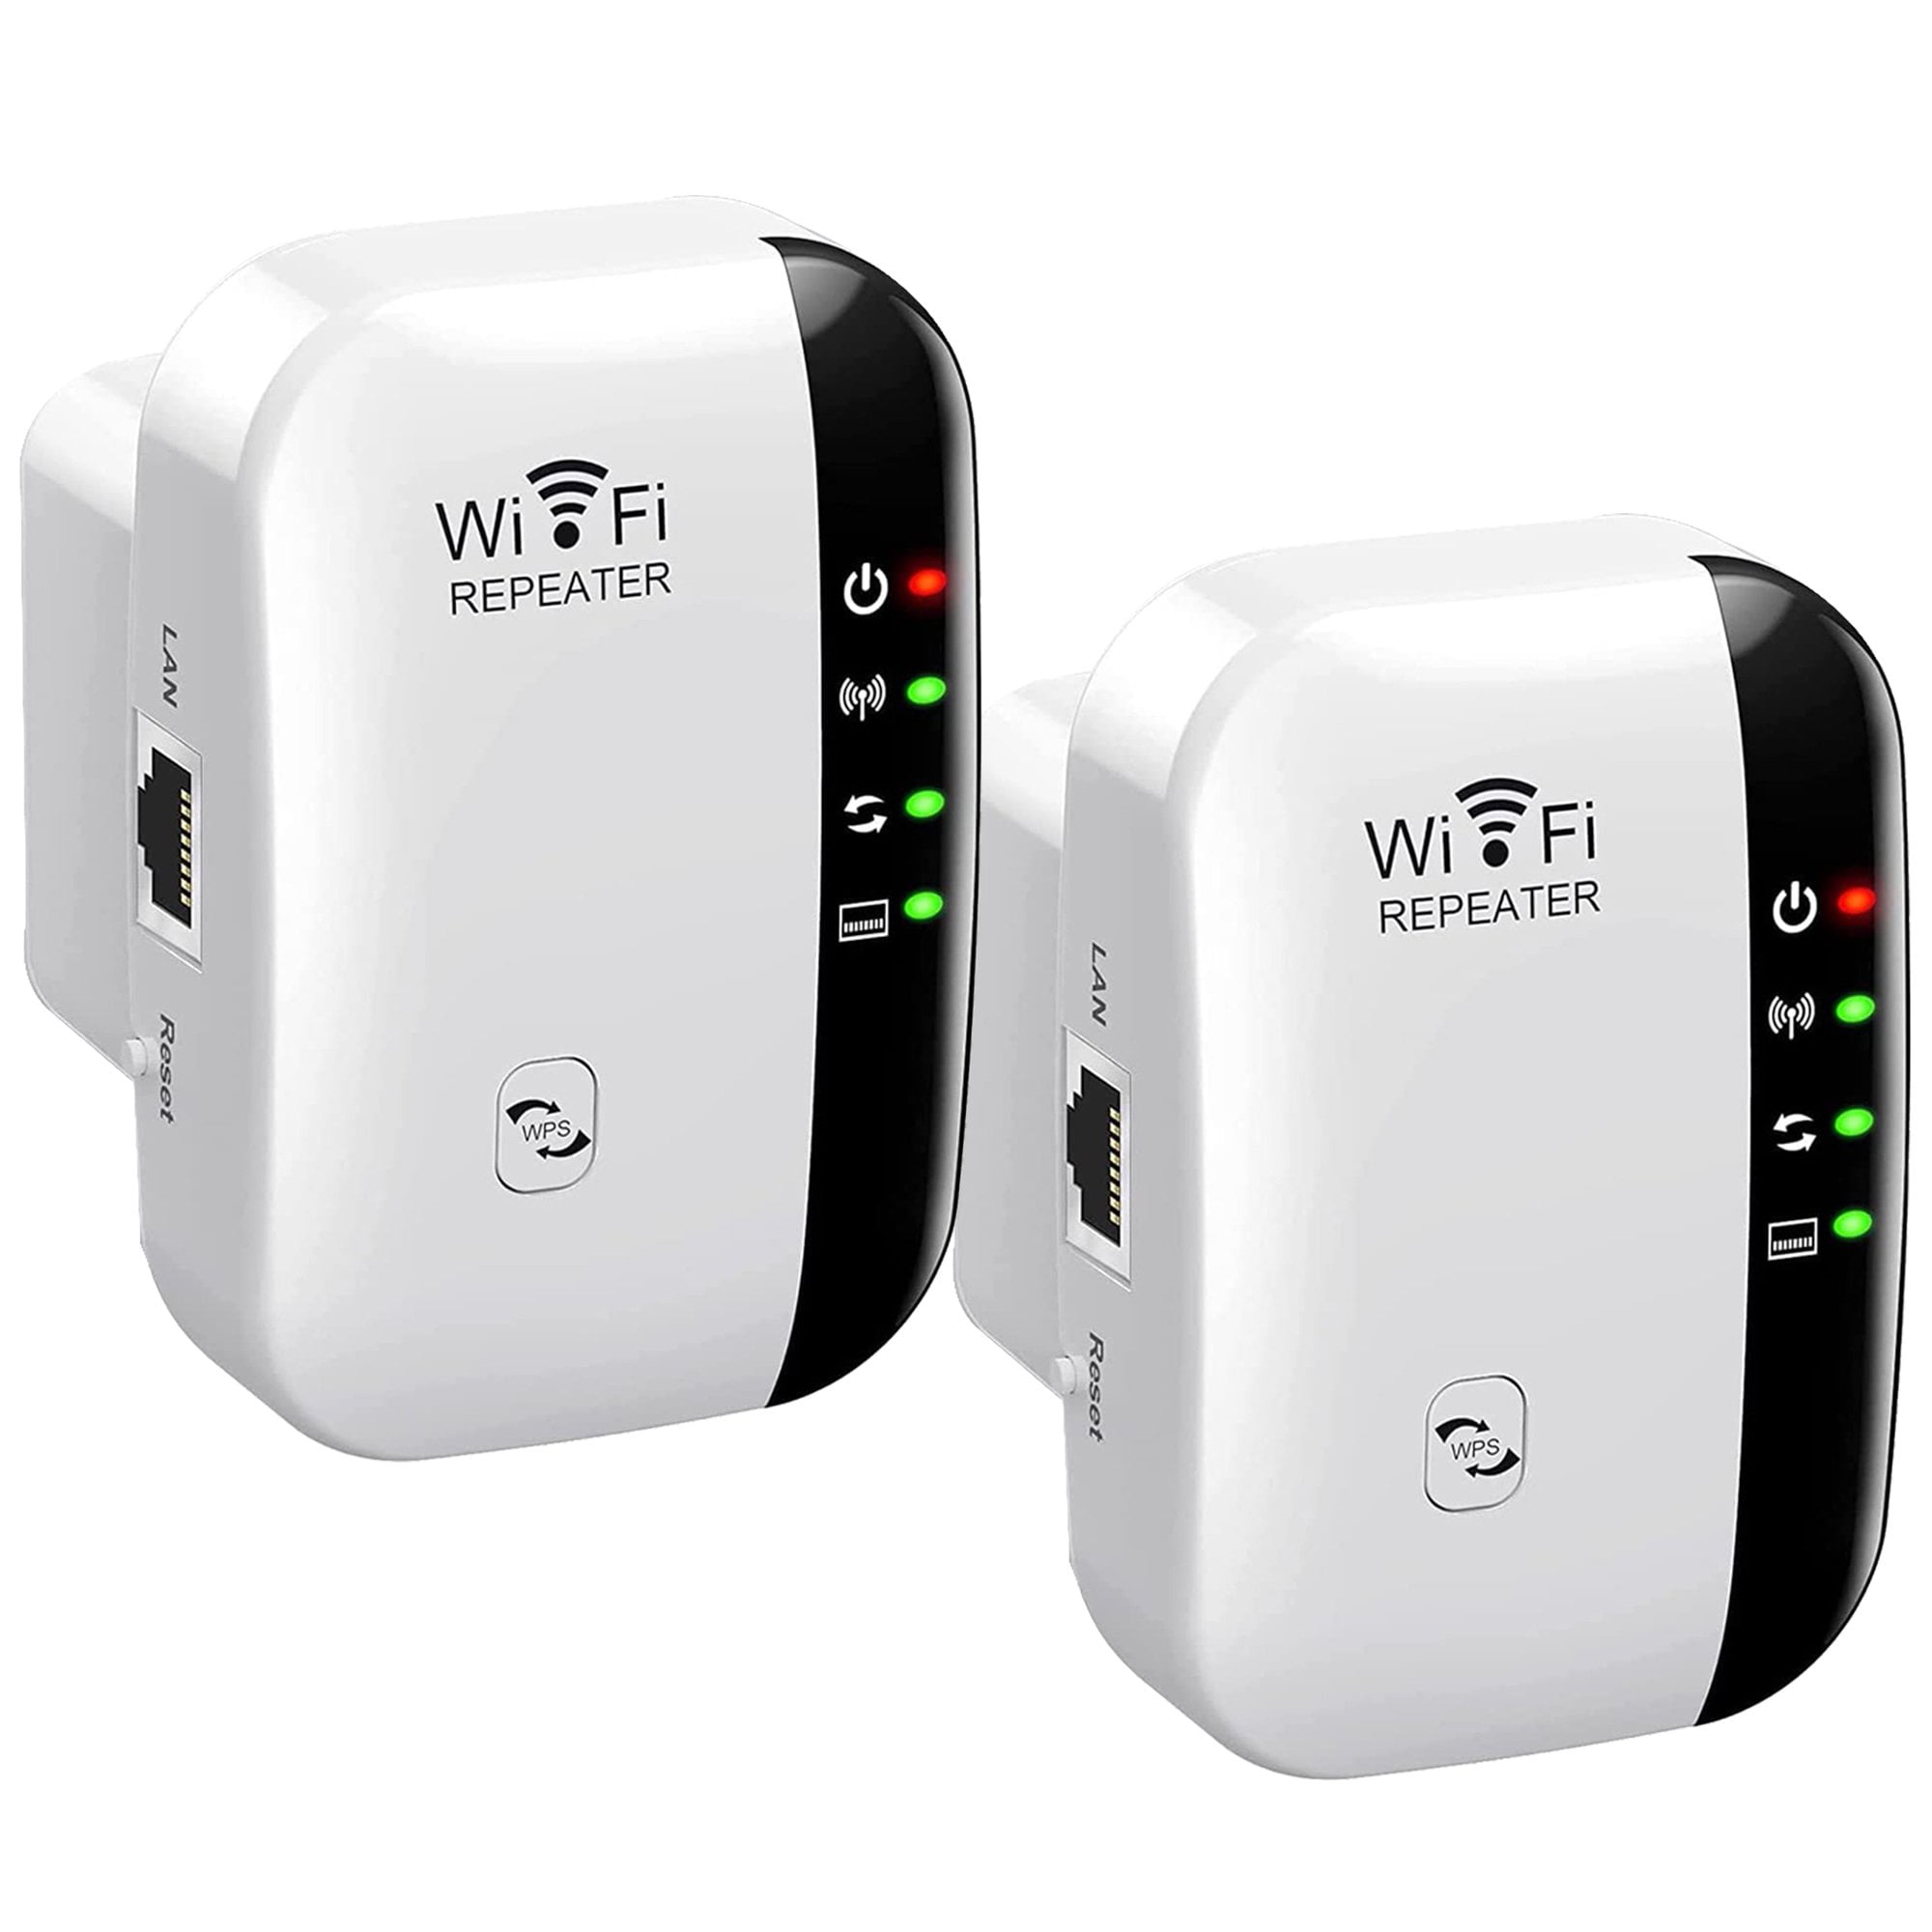 Pack WiFi Extender, Signal Booster Up to 2640sq.ft 25 Devices, Wireless Internet Repeater, WiFi Range Extender, Long Range Amplifier with Ethernet Port, 1-Tap Setup, Access Point - Walmart.com